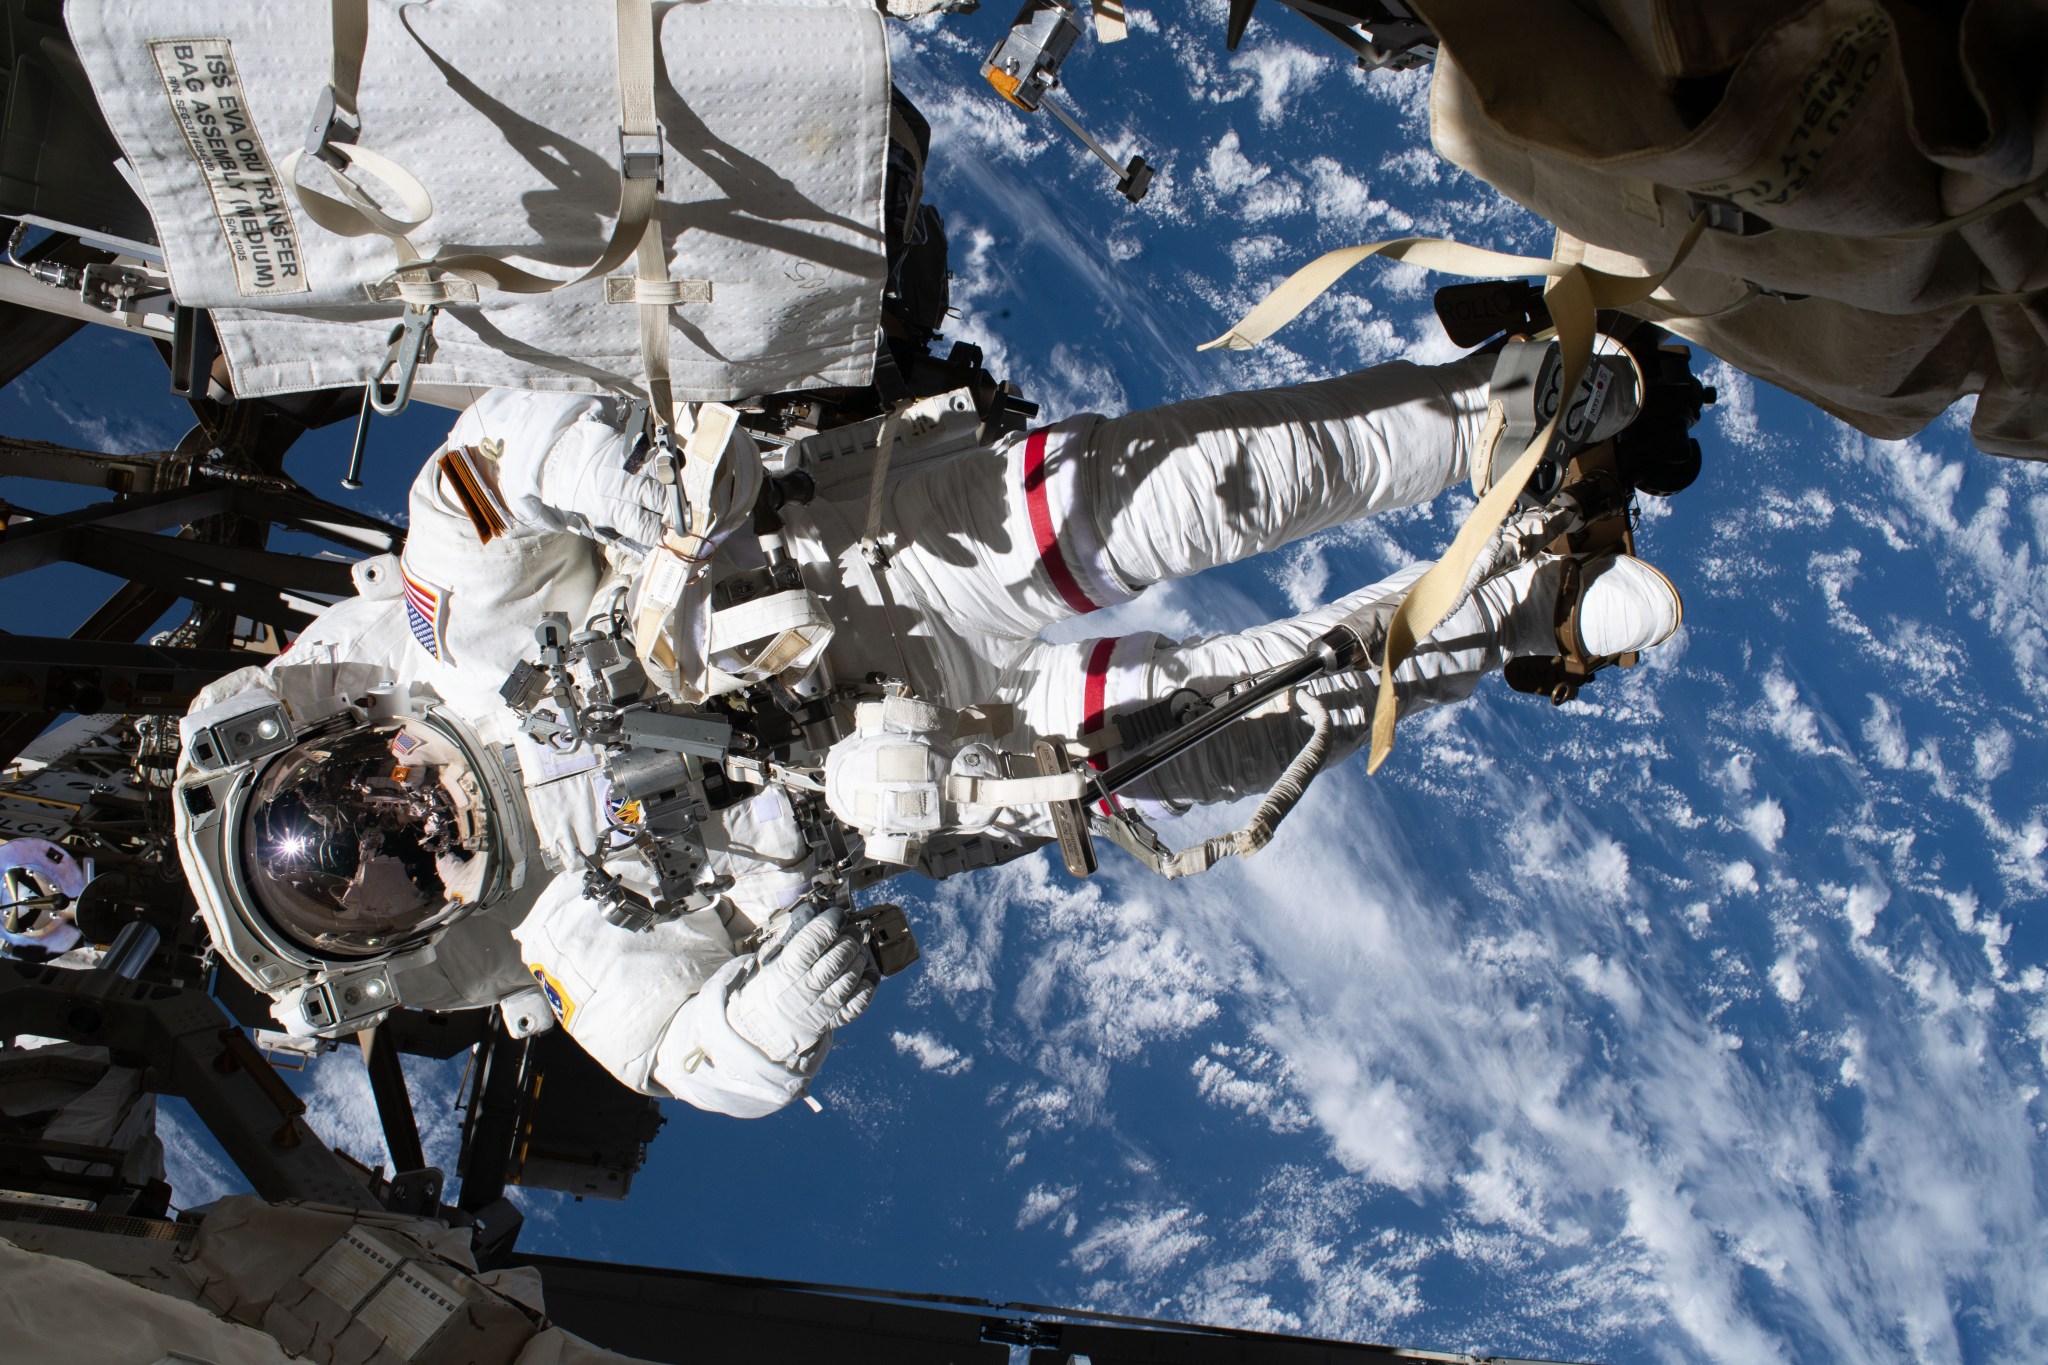 NASA astronaut Andrew Morgan is pictured tethered to the International Space Station while finalizing thermal repairs on the Alpha Magnetic Spectrometer, a dark matter and antimatter detector, during a spacewalk that lasted 6 hours and 16 minutes.